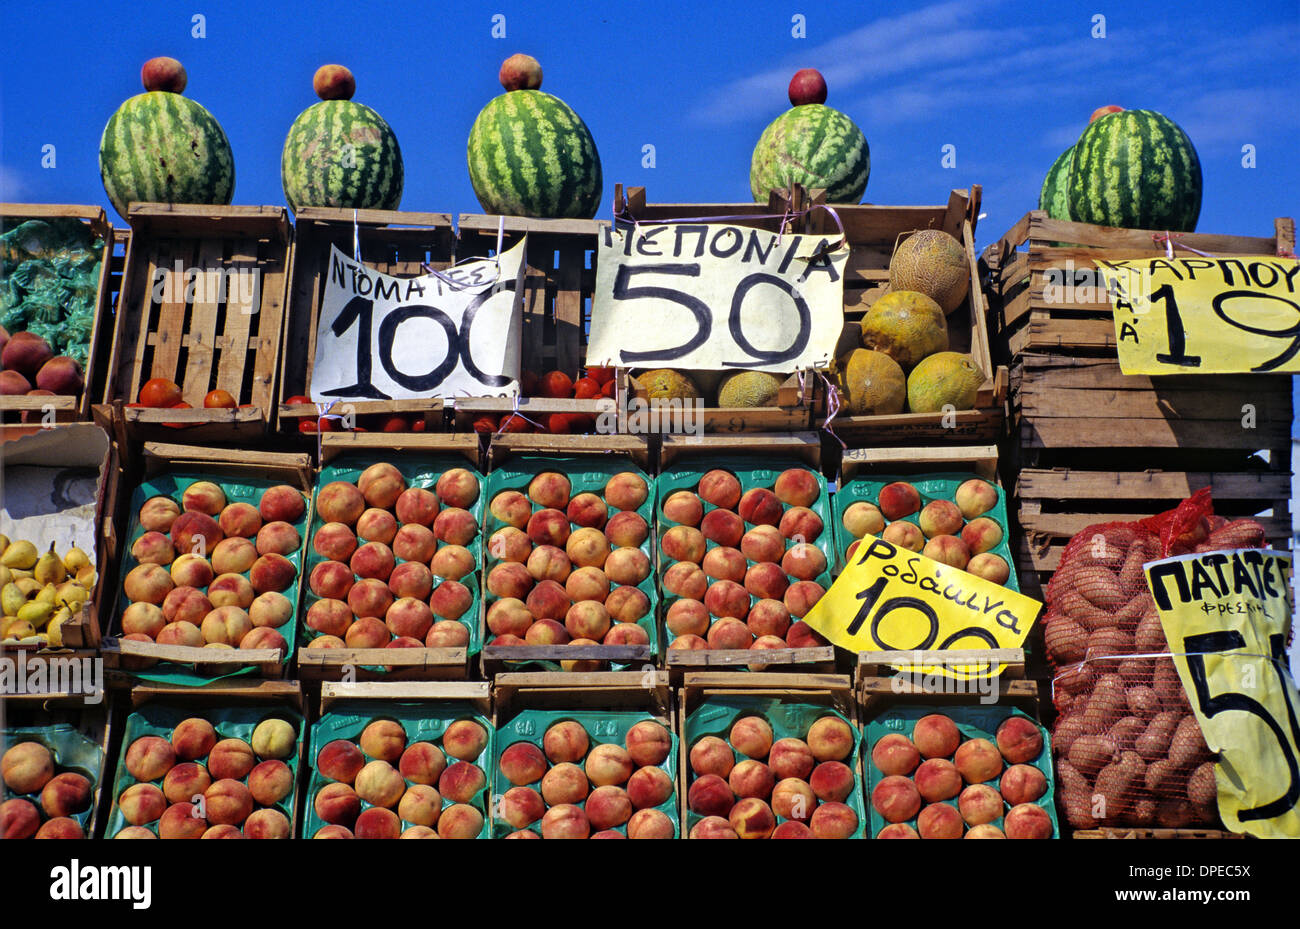 Display of Greek Fruit Peaches & Melons on Market Stall or Fruit Stall Priced in Drachma Greece Stock Photo